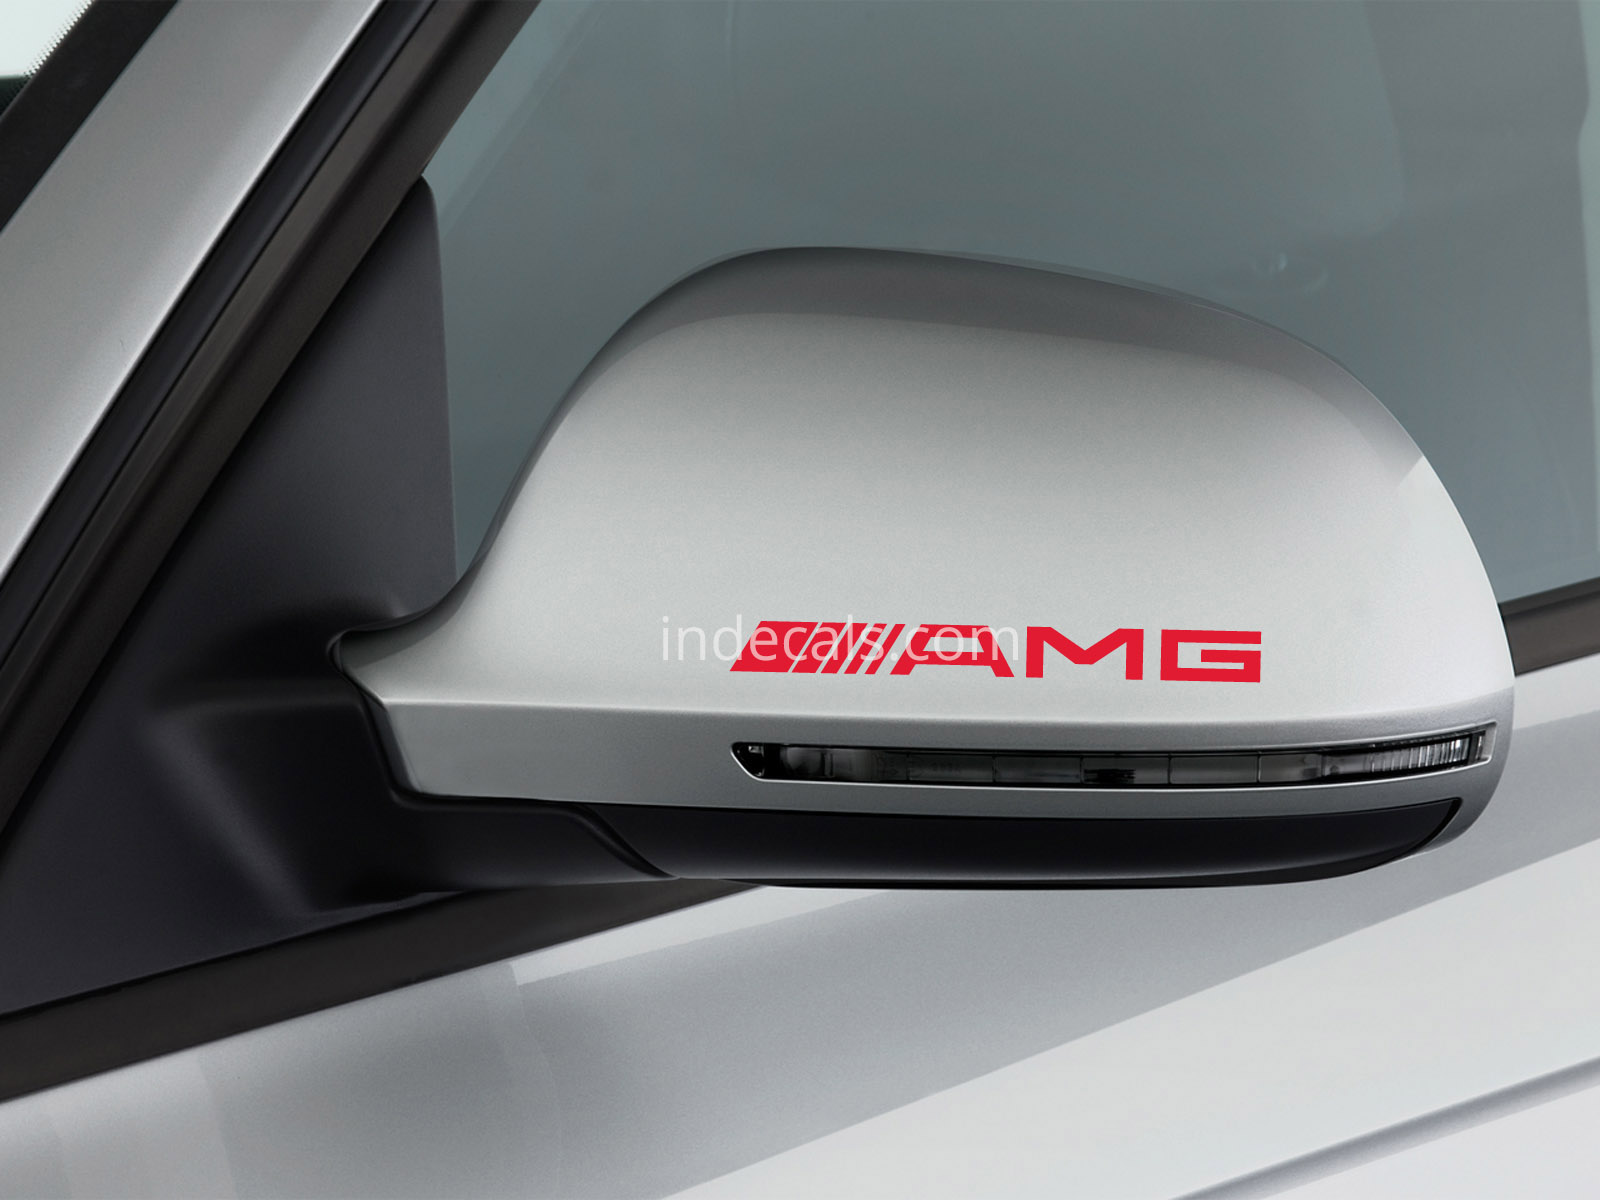 3 x AMG Stickers for Mirrors - White